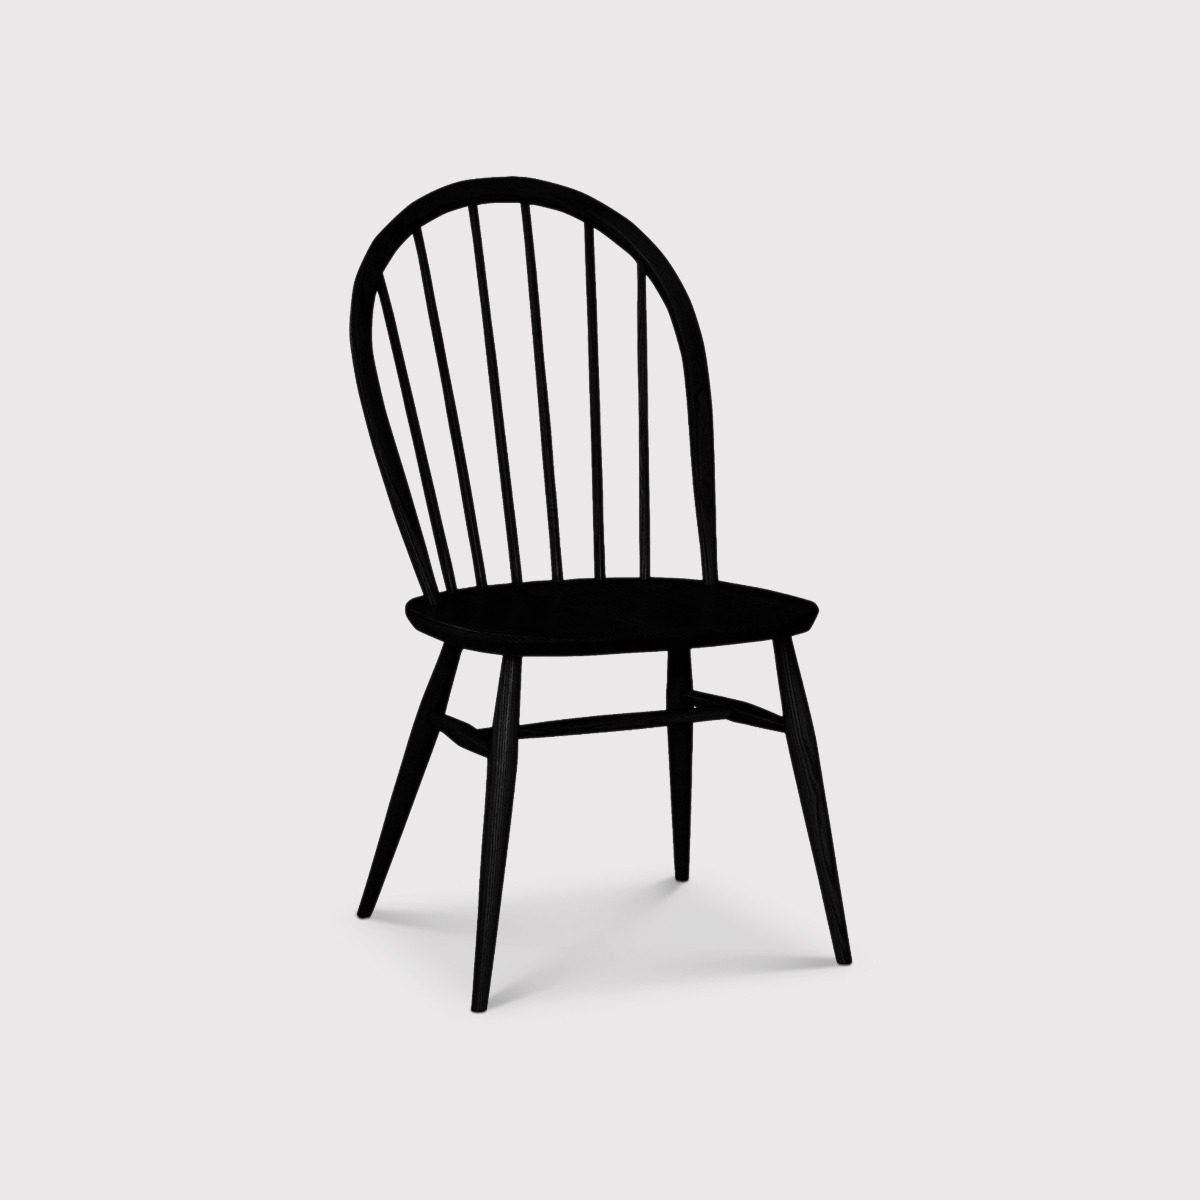 Ercol Windsor Dining Chair, Black Wood - Barker & Stonehouse - image 1